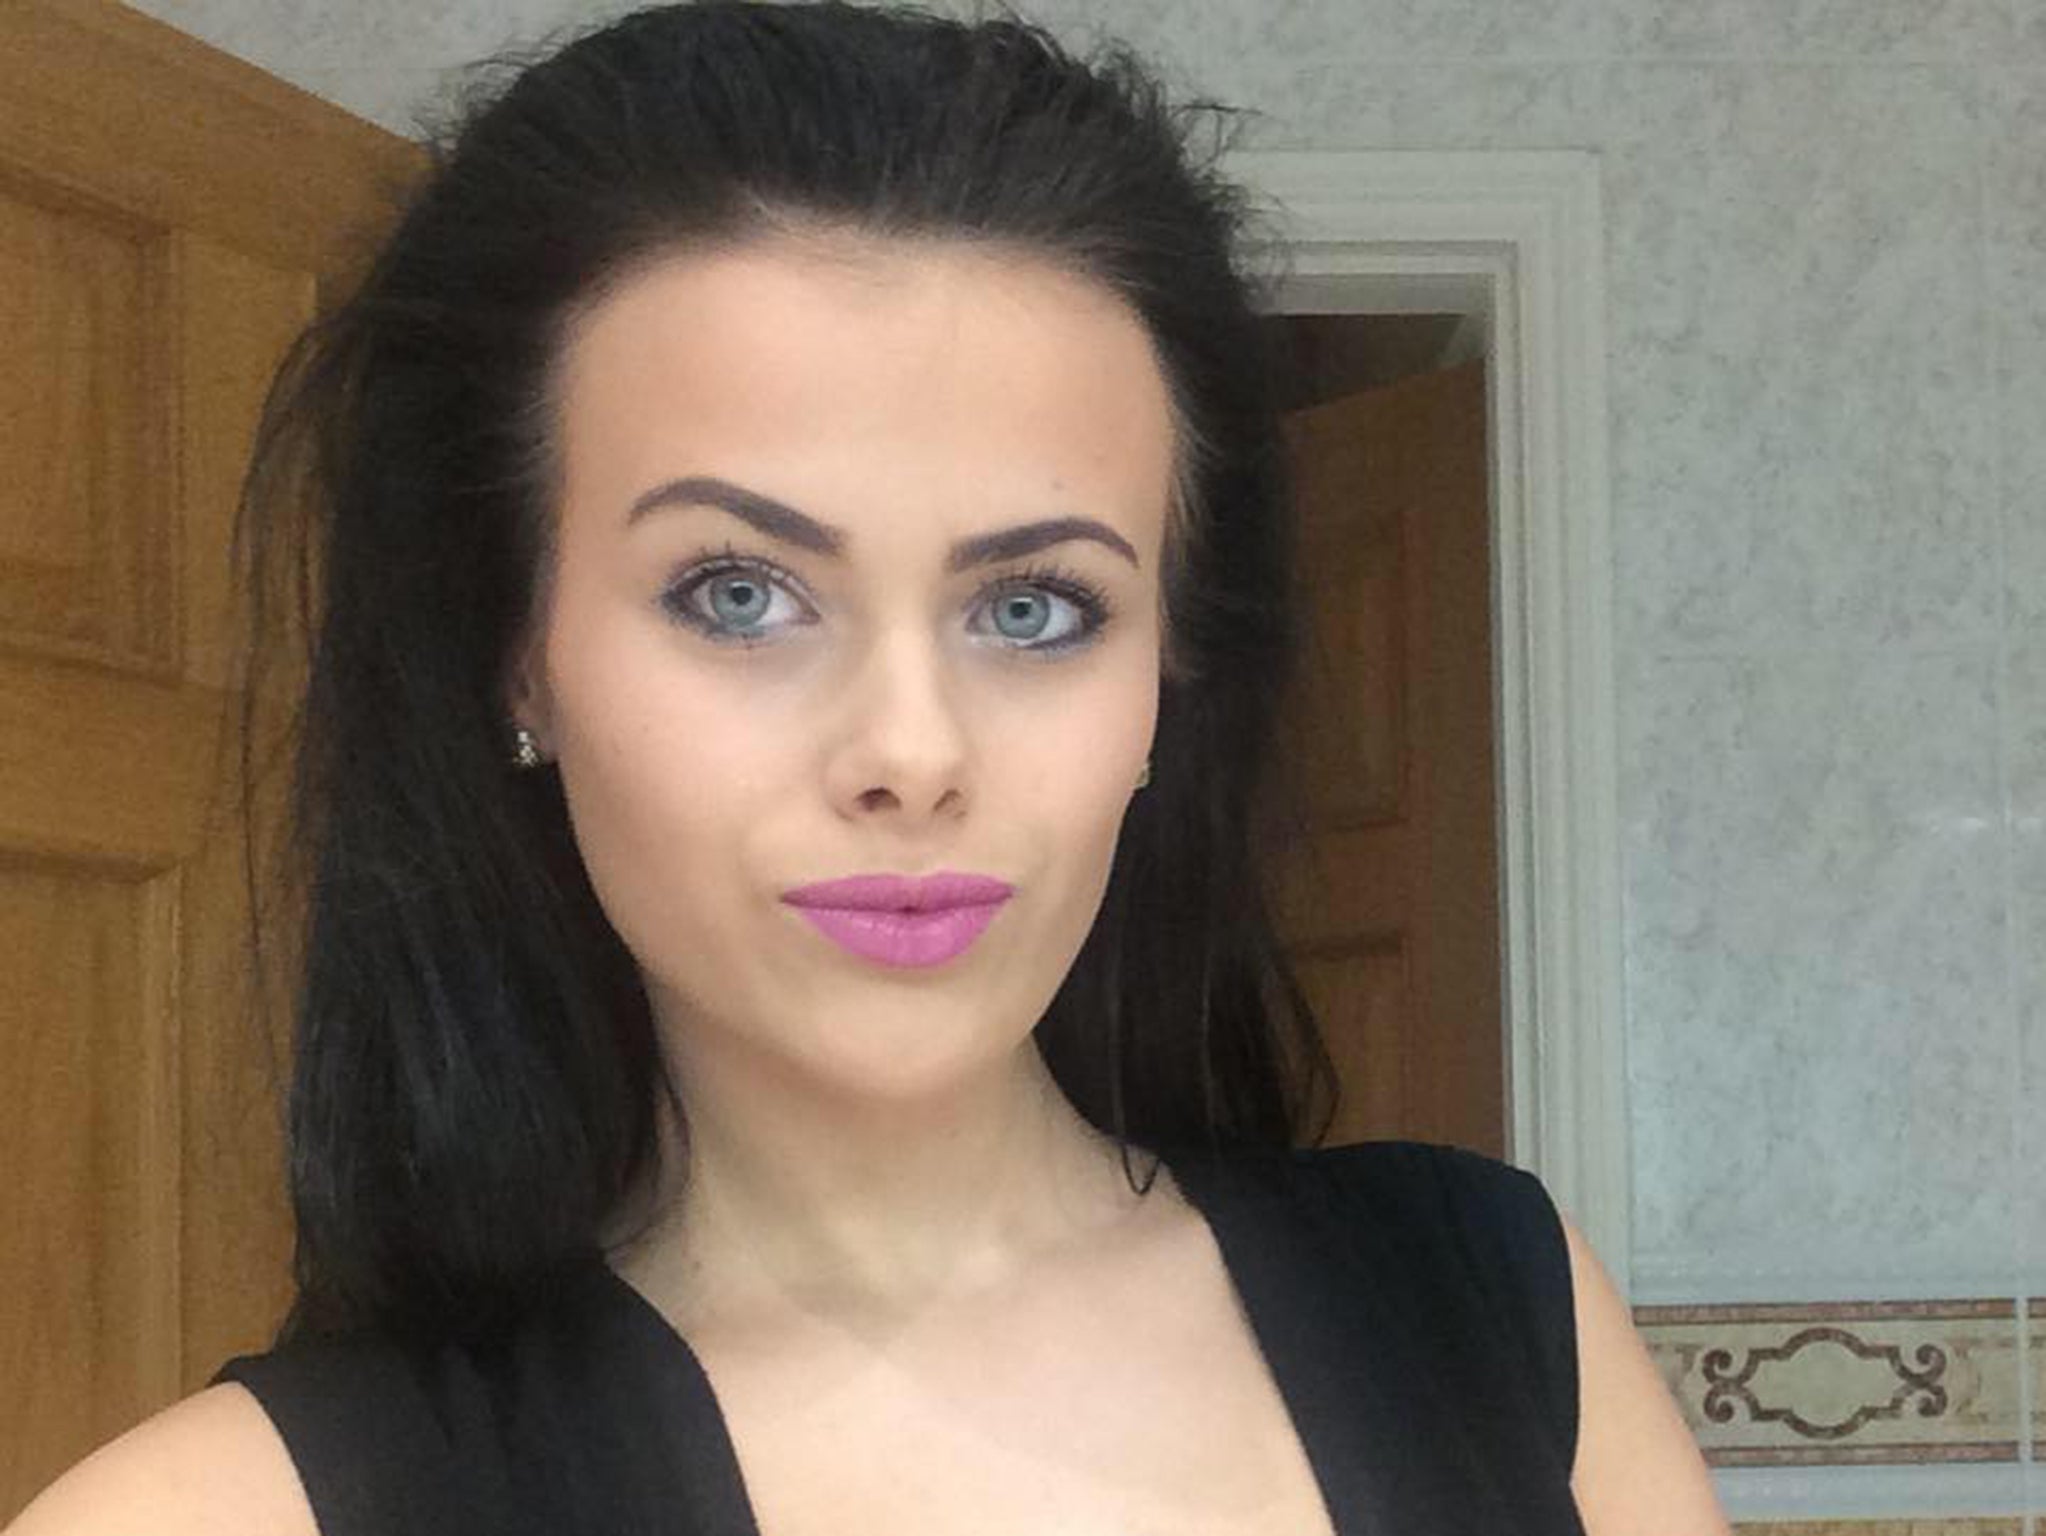 India Chipchase, 20, was last seen on Saturday night leaving a club in Nothampton with her friends